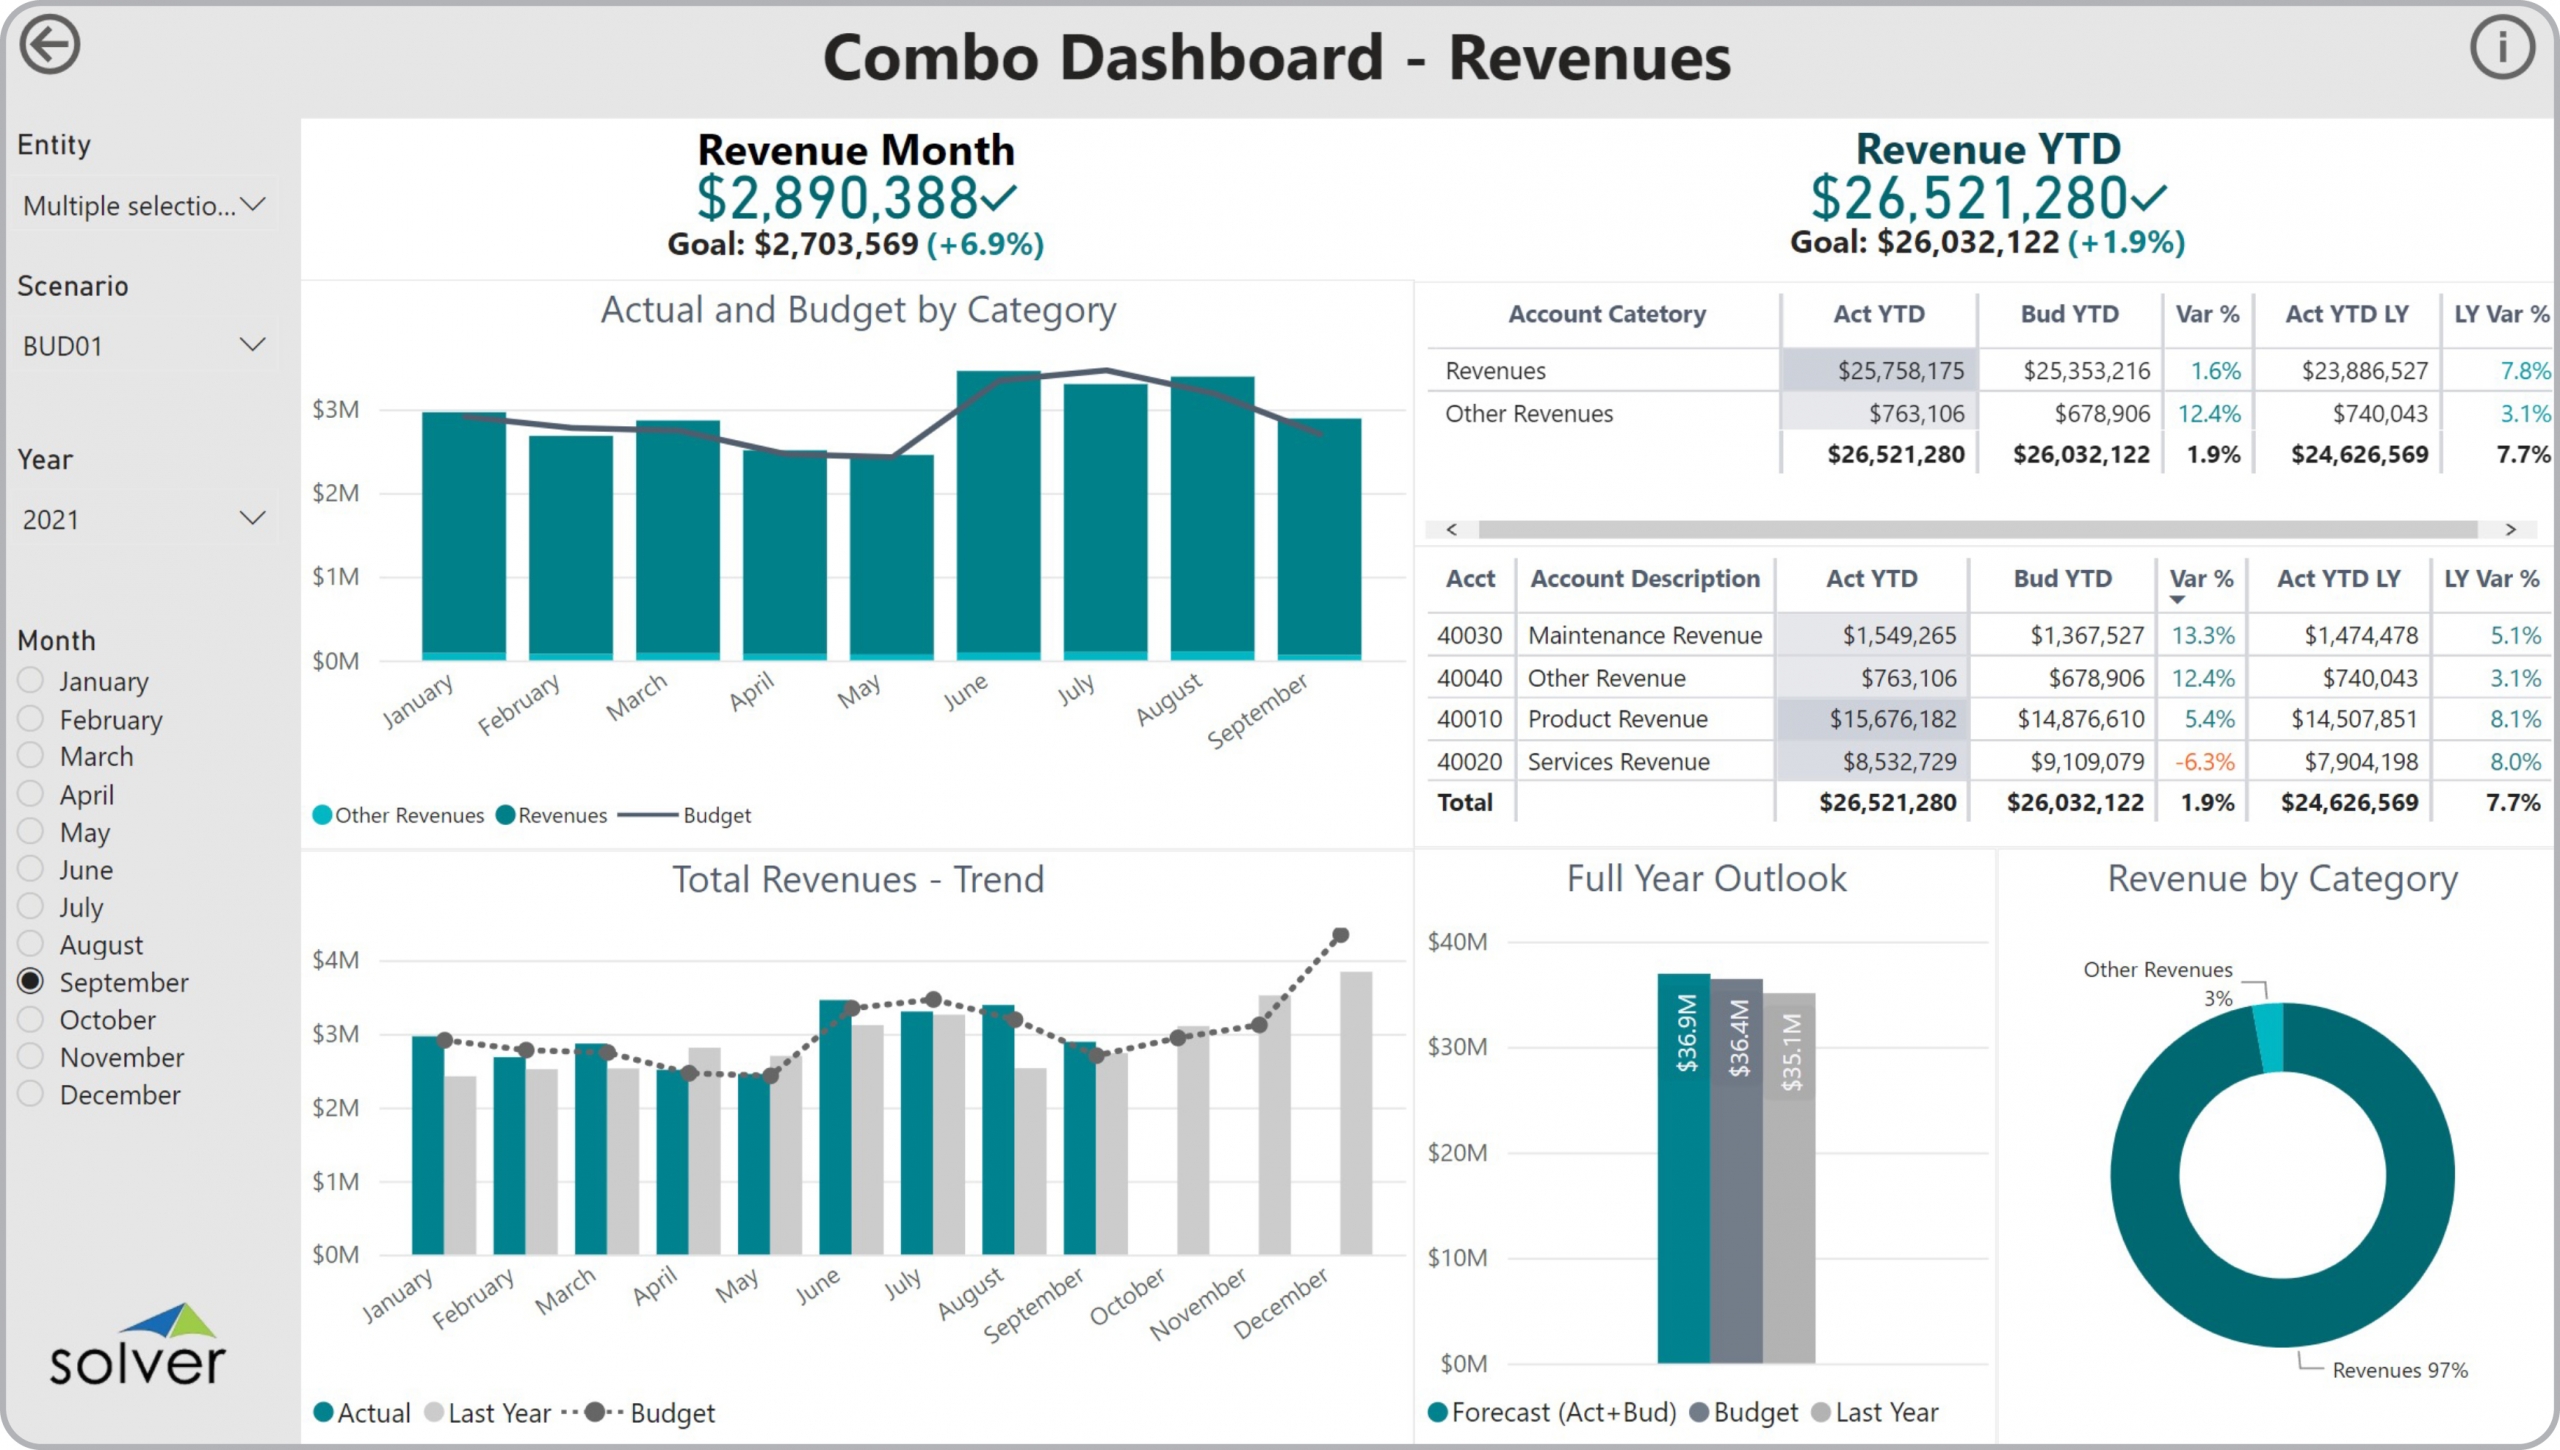 Example of a Revenue Dashboard with Trends and Variances to Streamline the Monthly Reporting Process